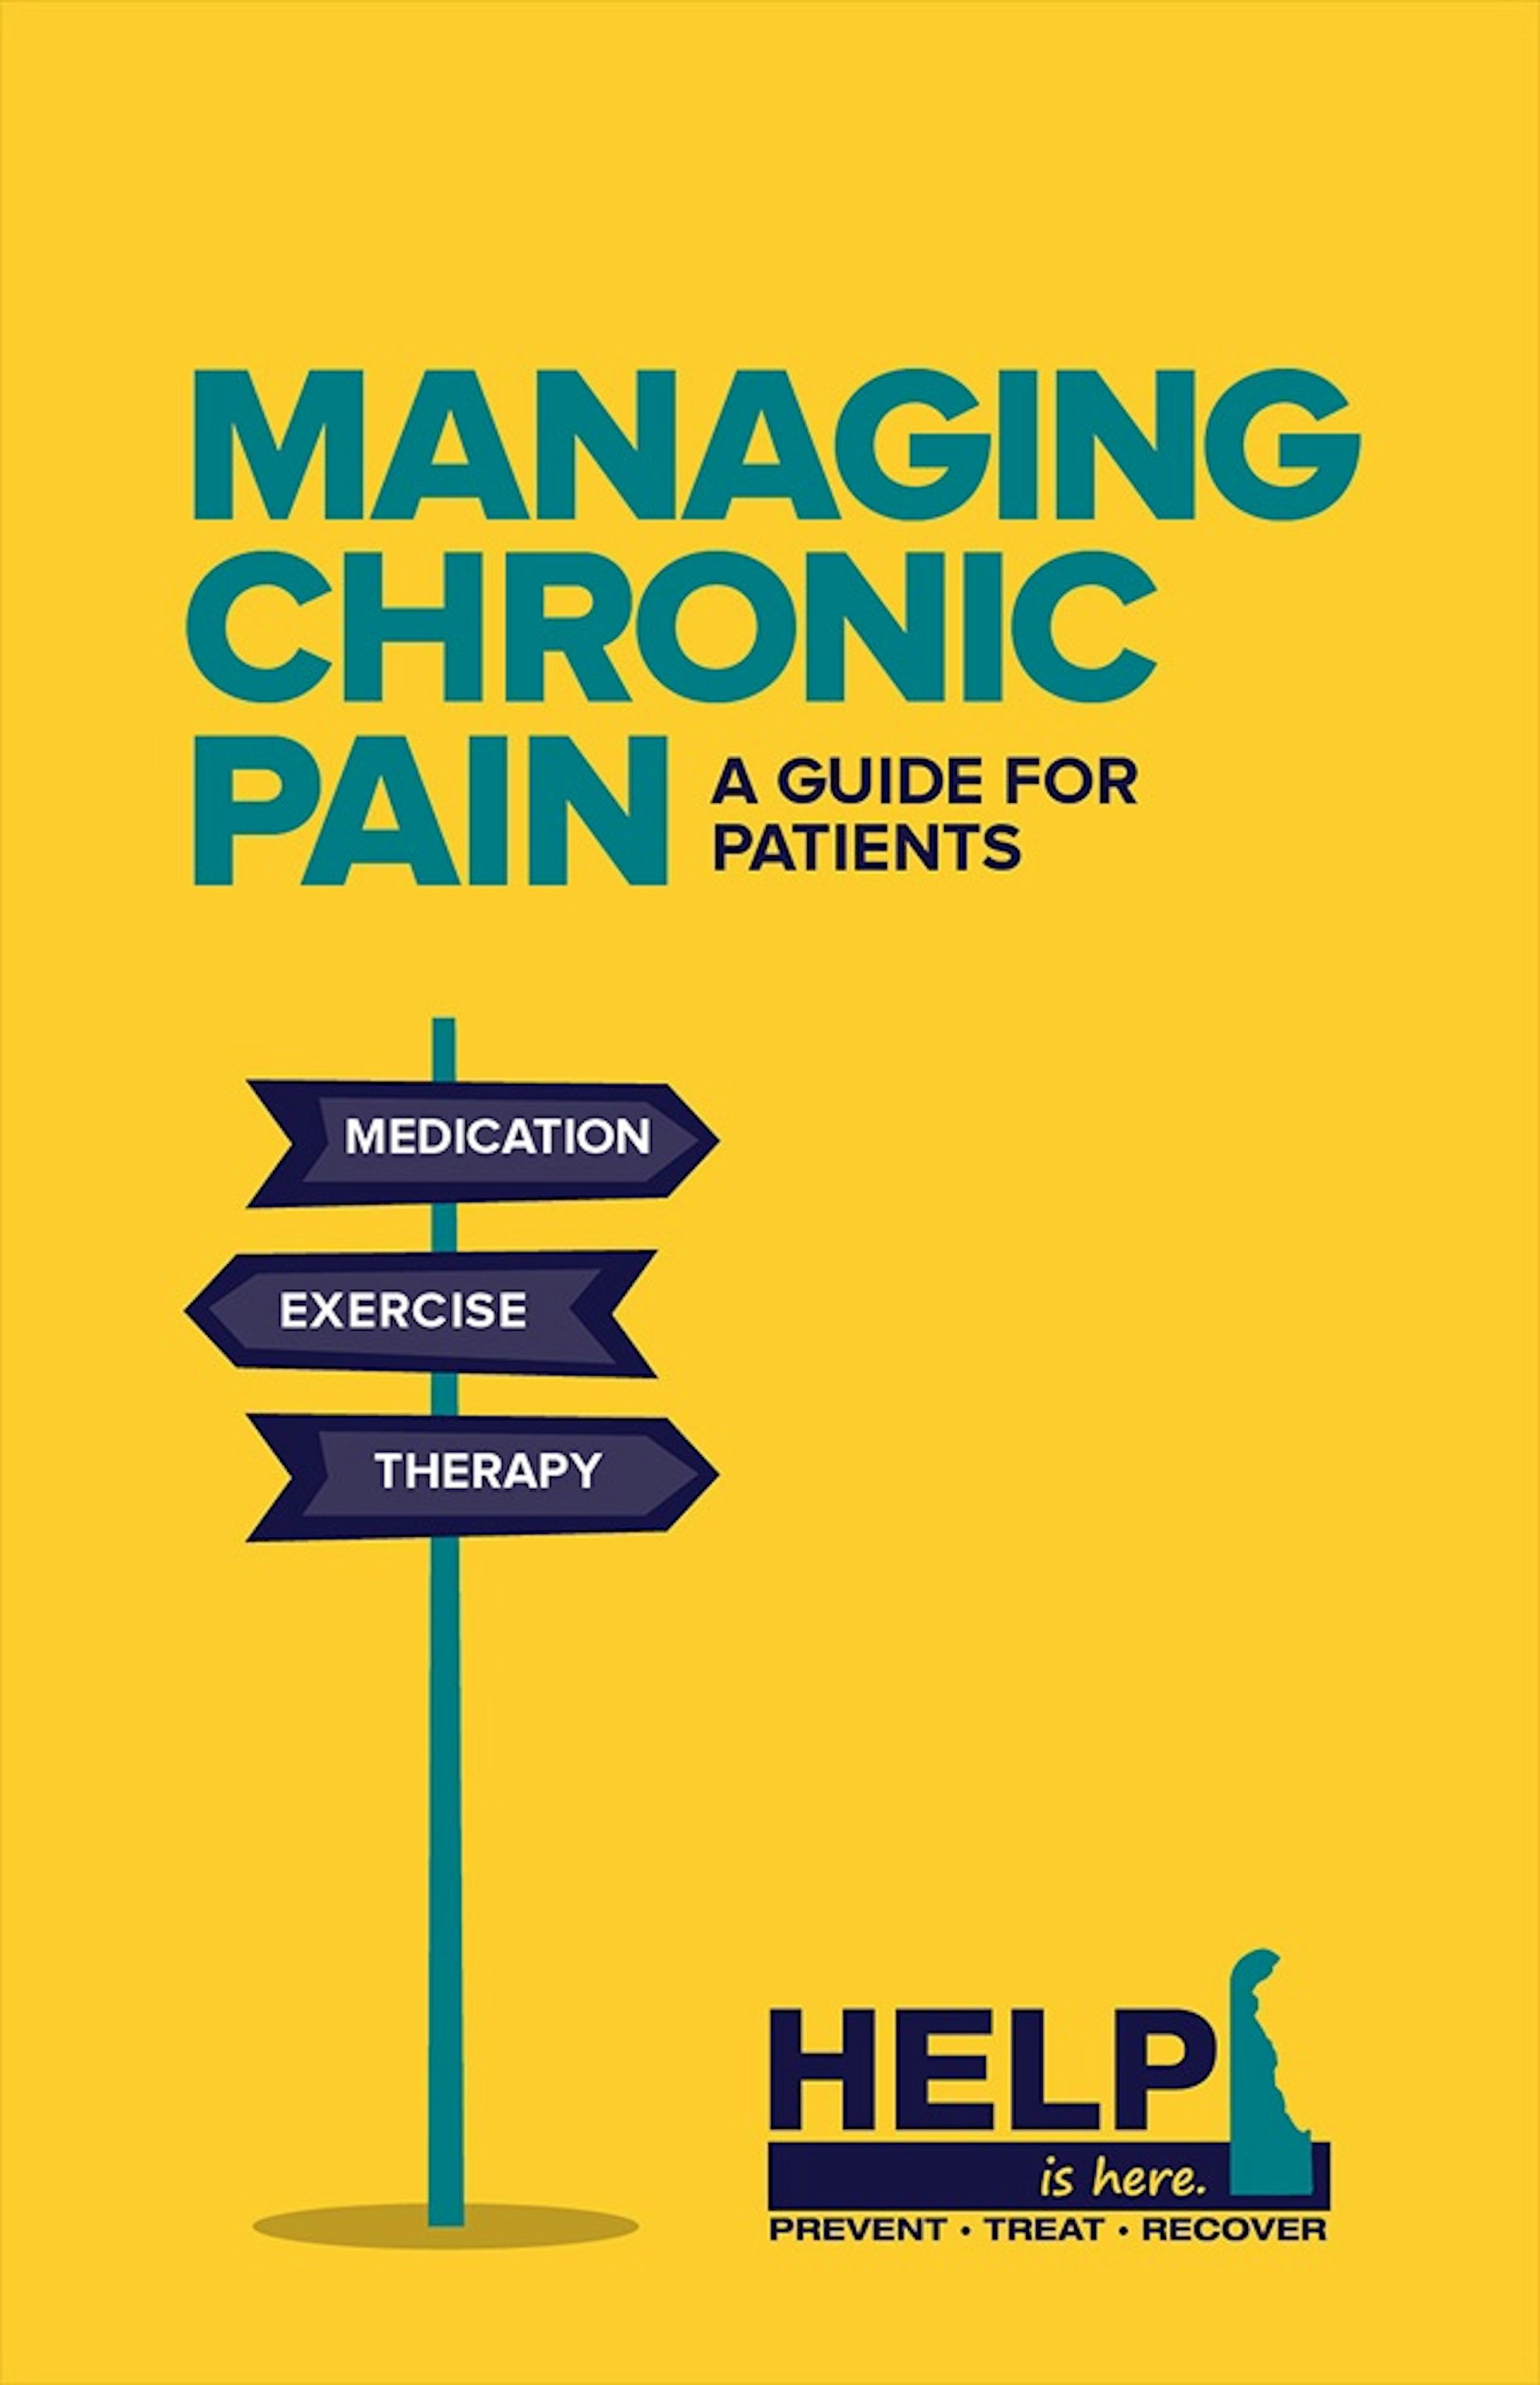 Managing Chronic Pain: A Guide for Patients